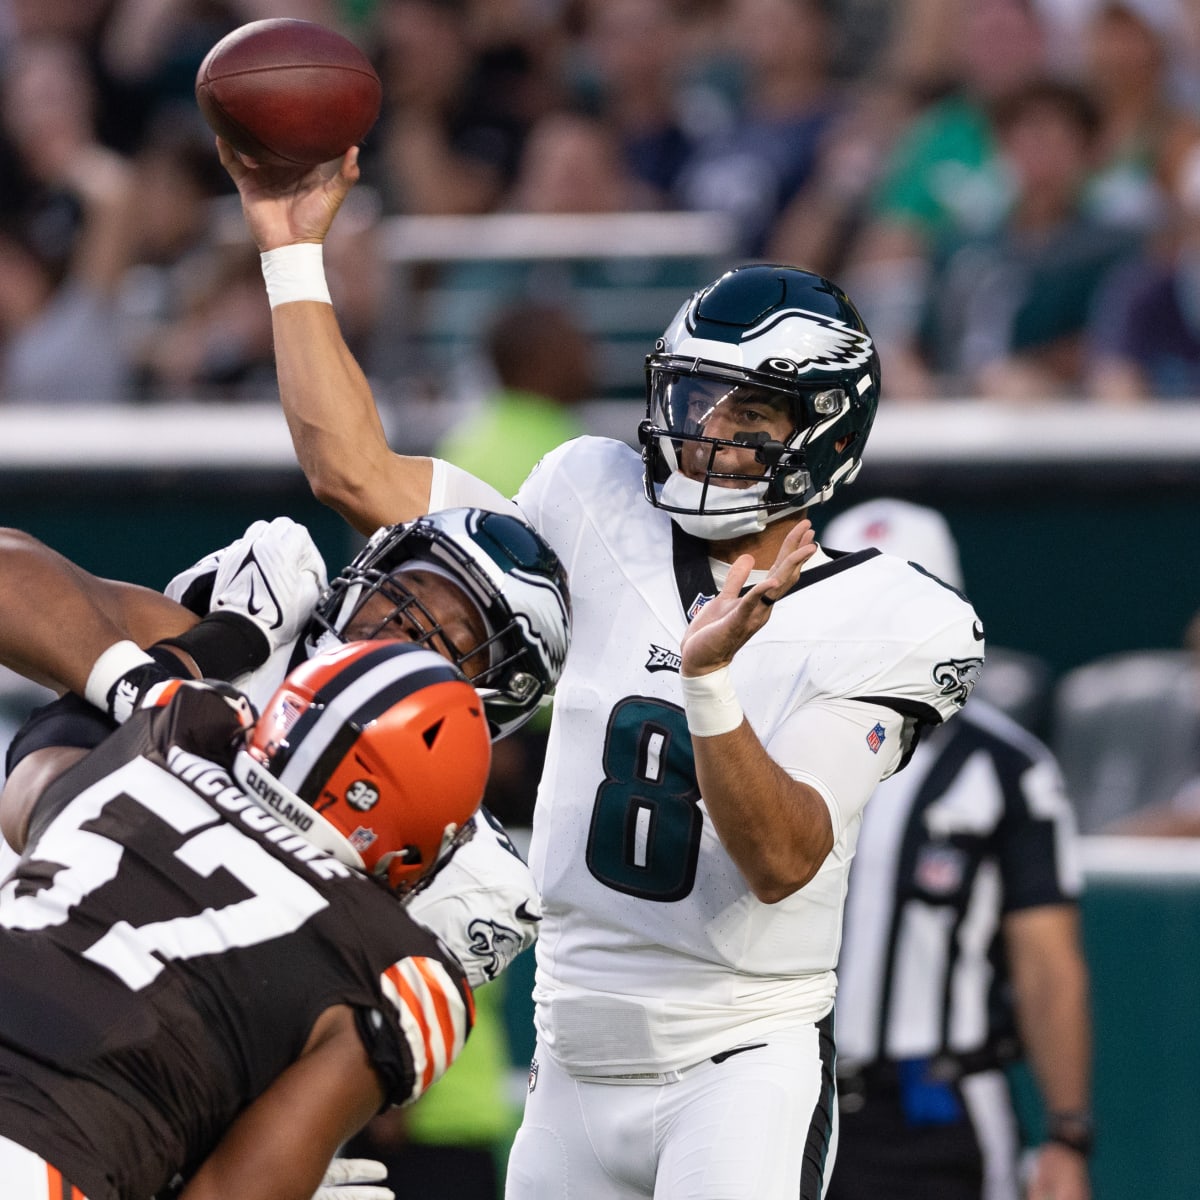 Philadelphia Eagles Trail Cleveland Browns 8-3 at Halftime as Offenses  Struggle - Sports Illustrated Philadelphia Eagles News, Analysis and More